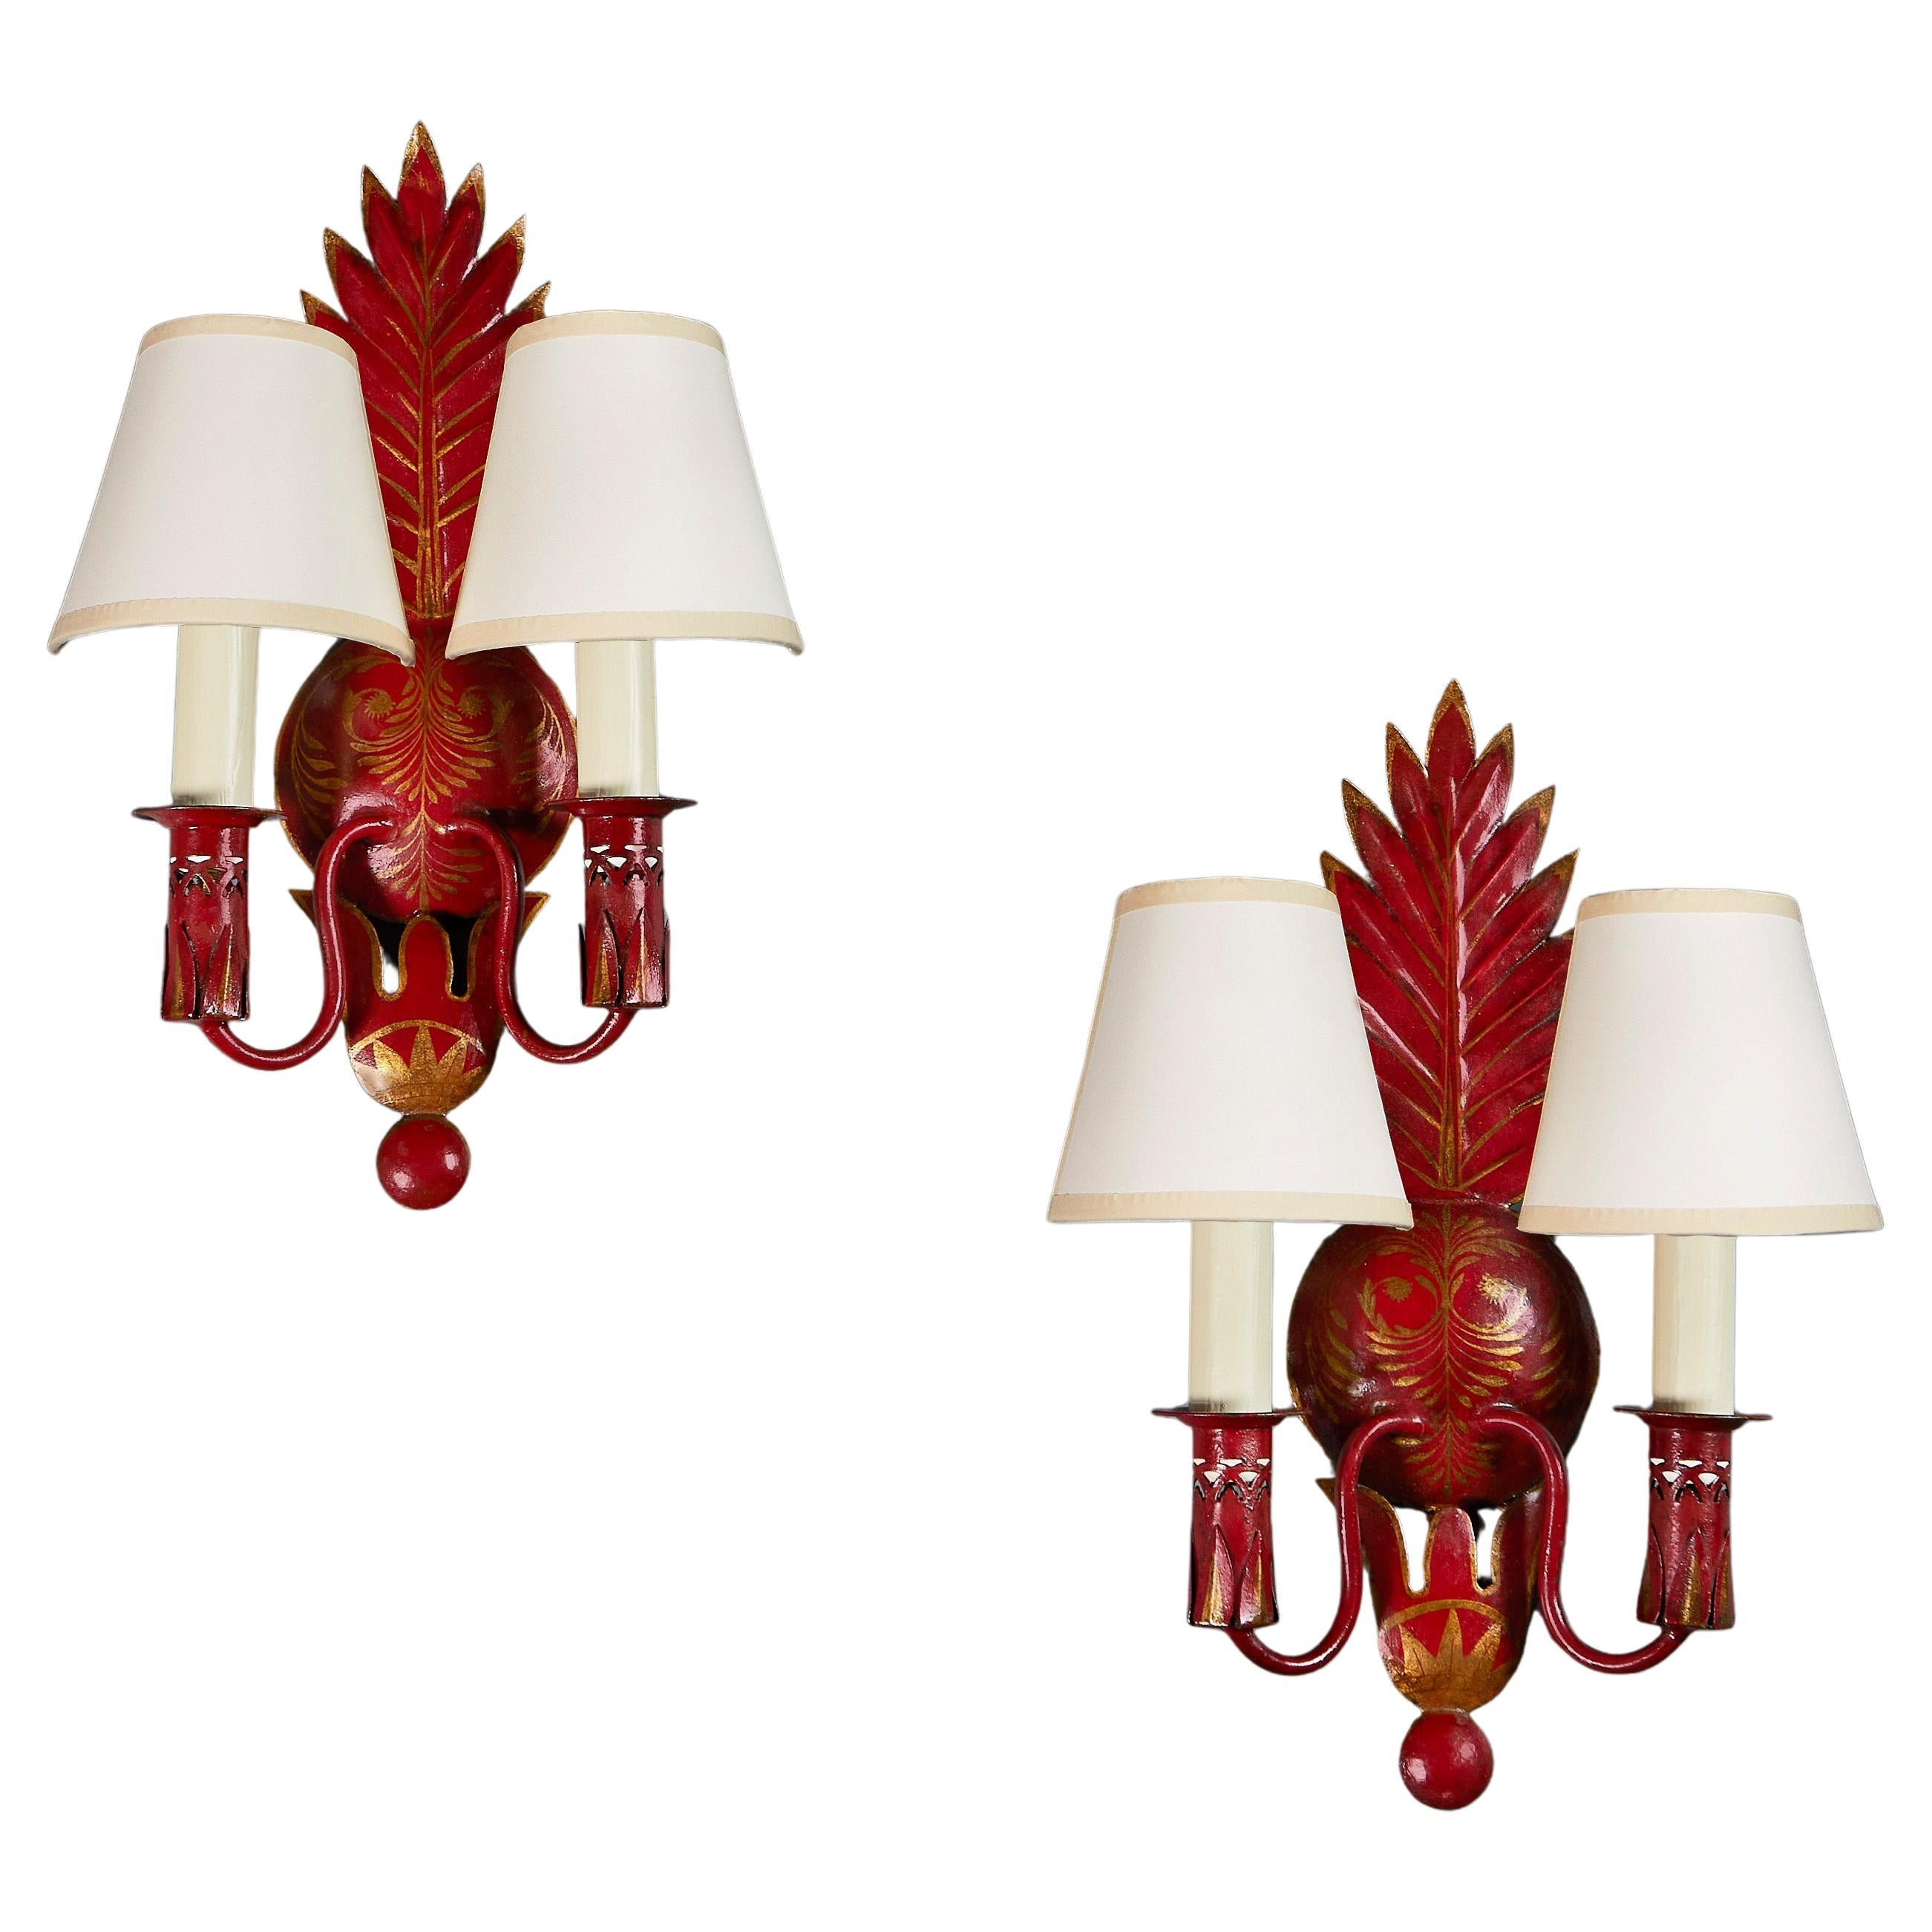 A Pair of French Red Tole Wall Lights